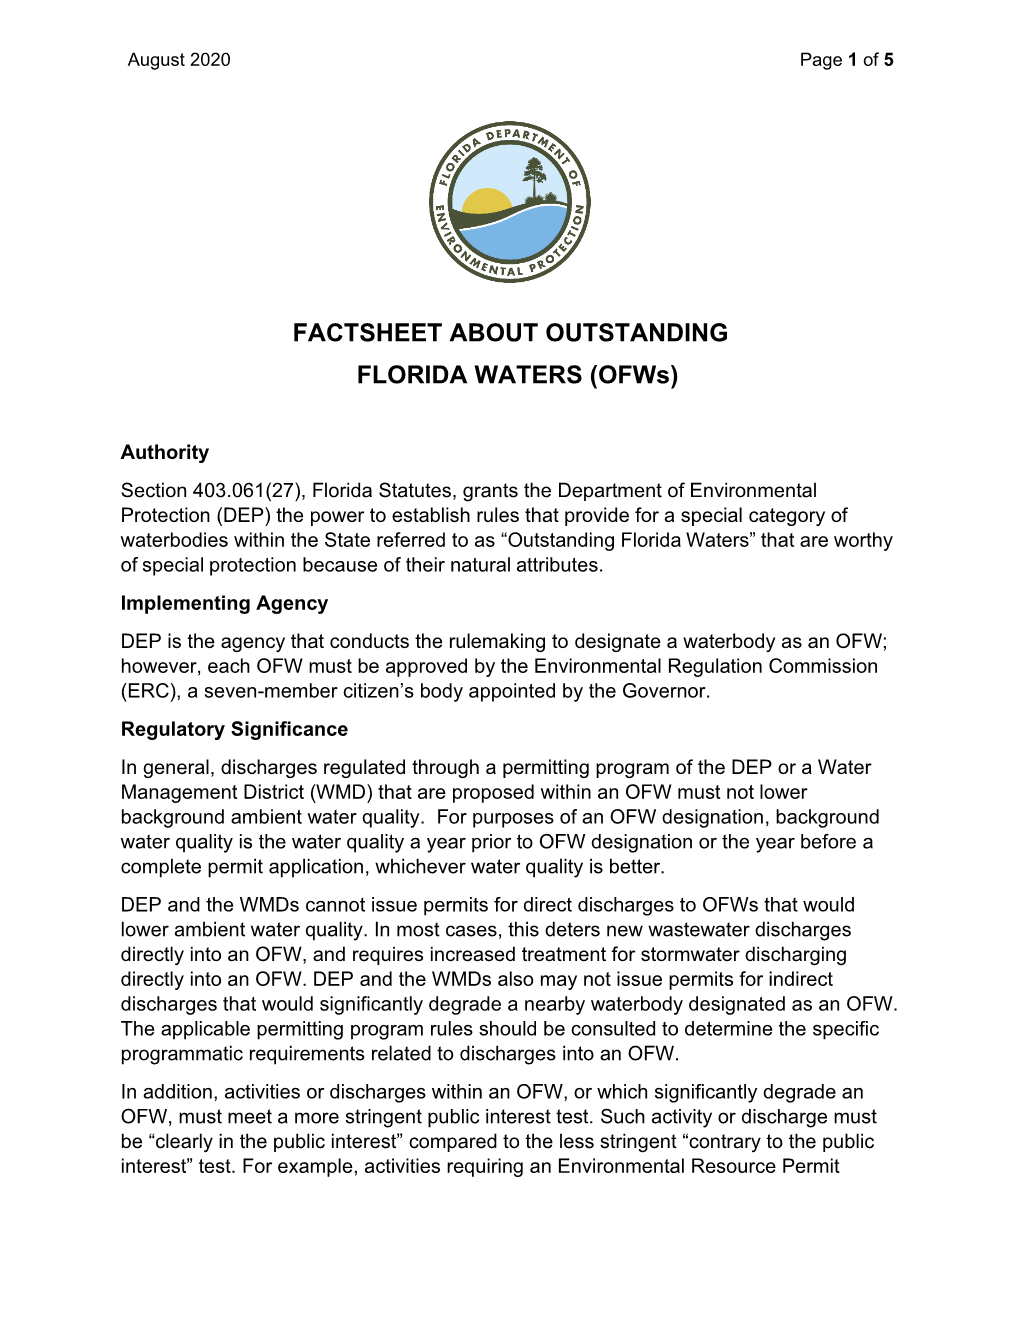 FACTSHEET ABOUT OUTSTANDING FLORIDA WATERS (Ofws)